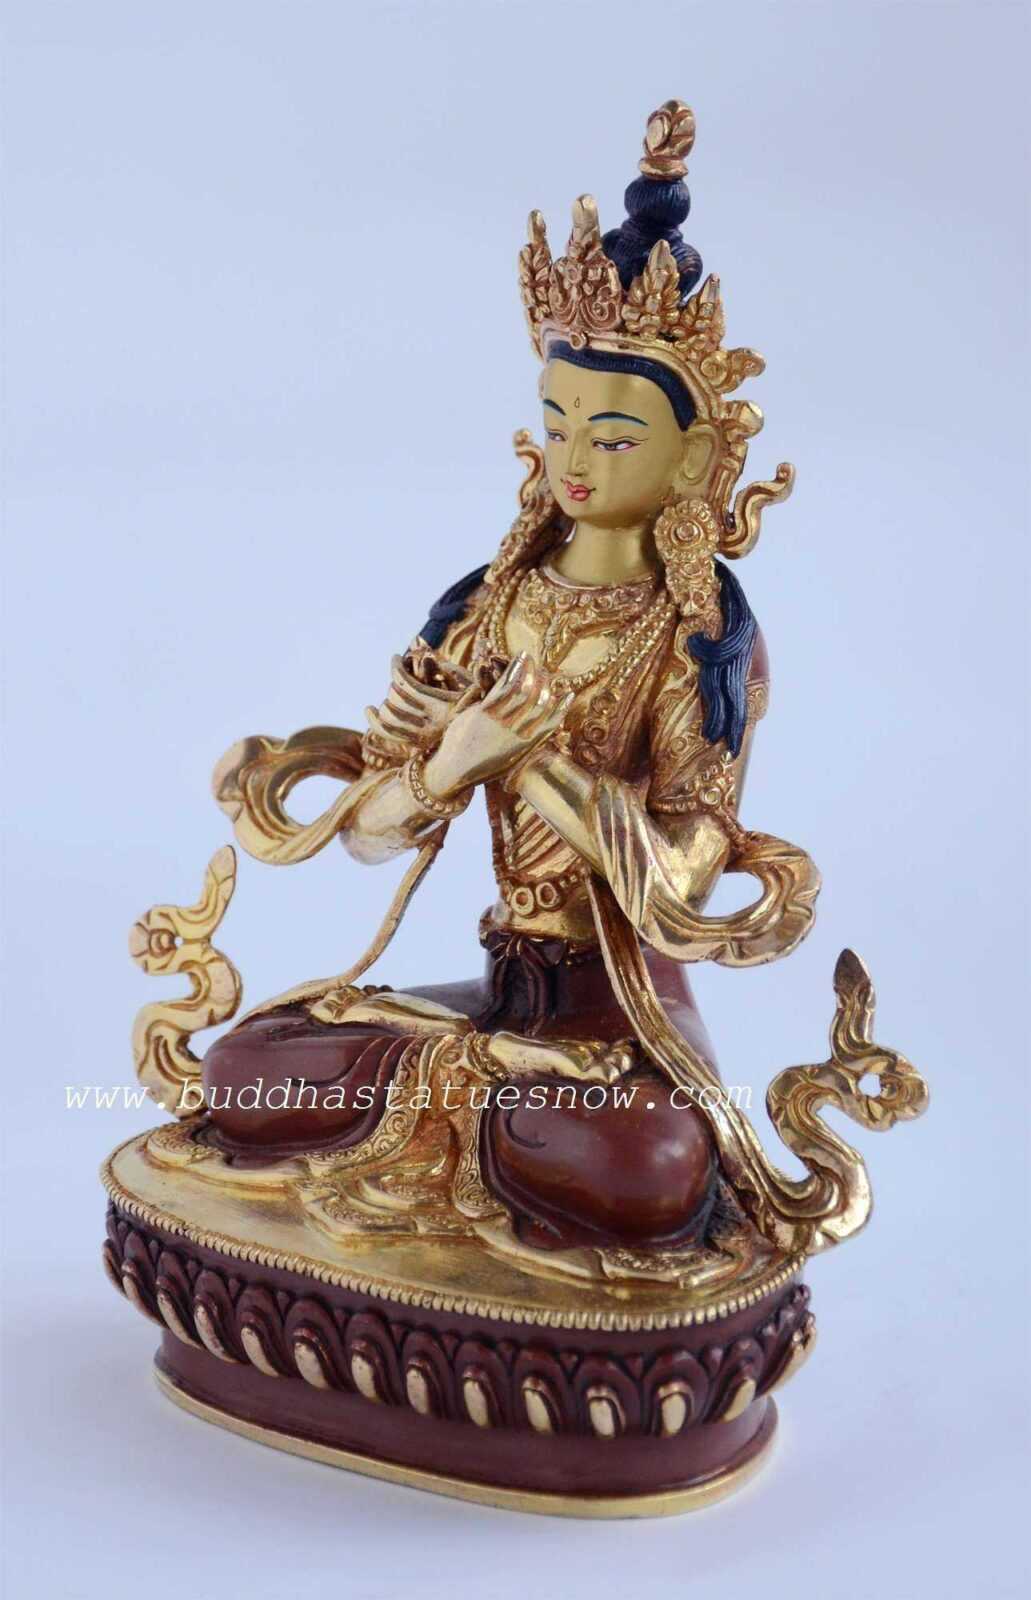 Partly Gold Gilded 9" Vajradhara Buddha Statues - Left